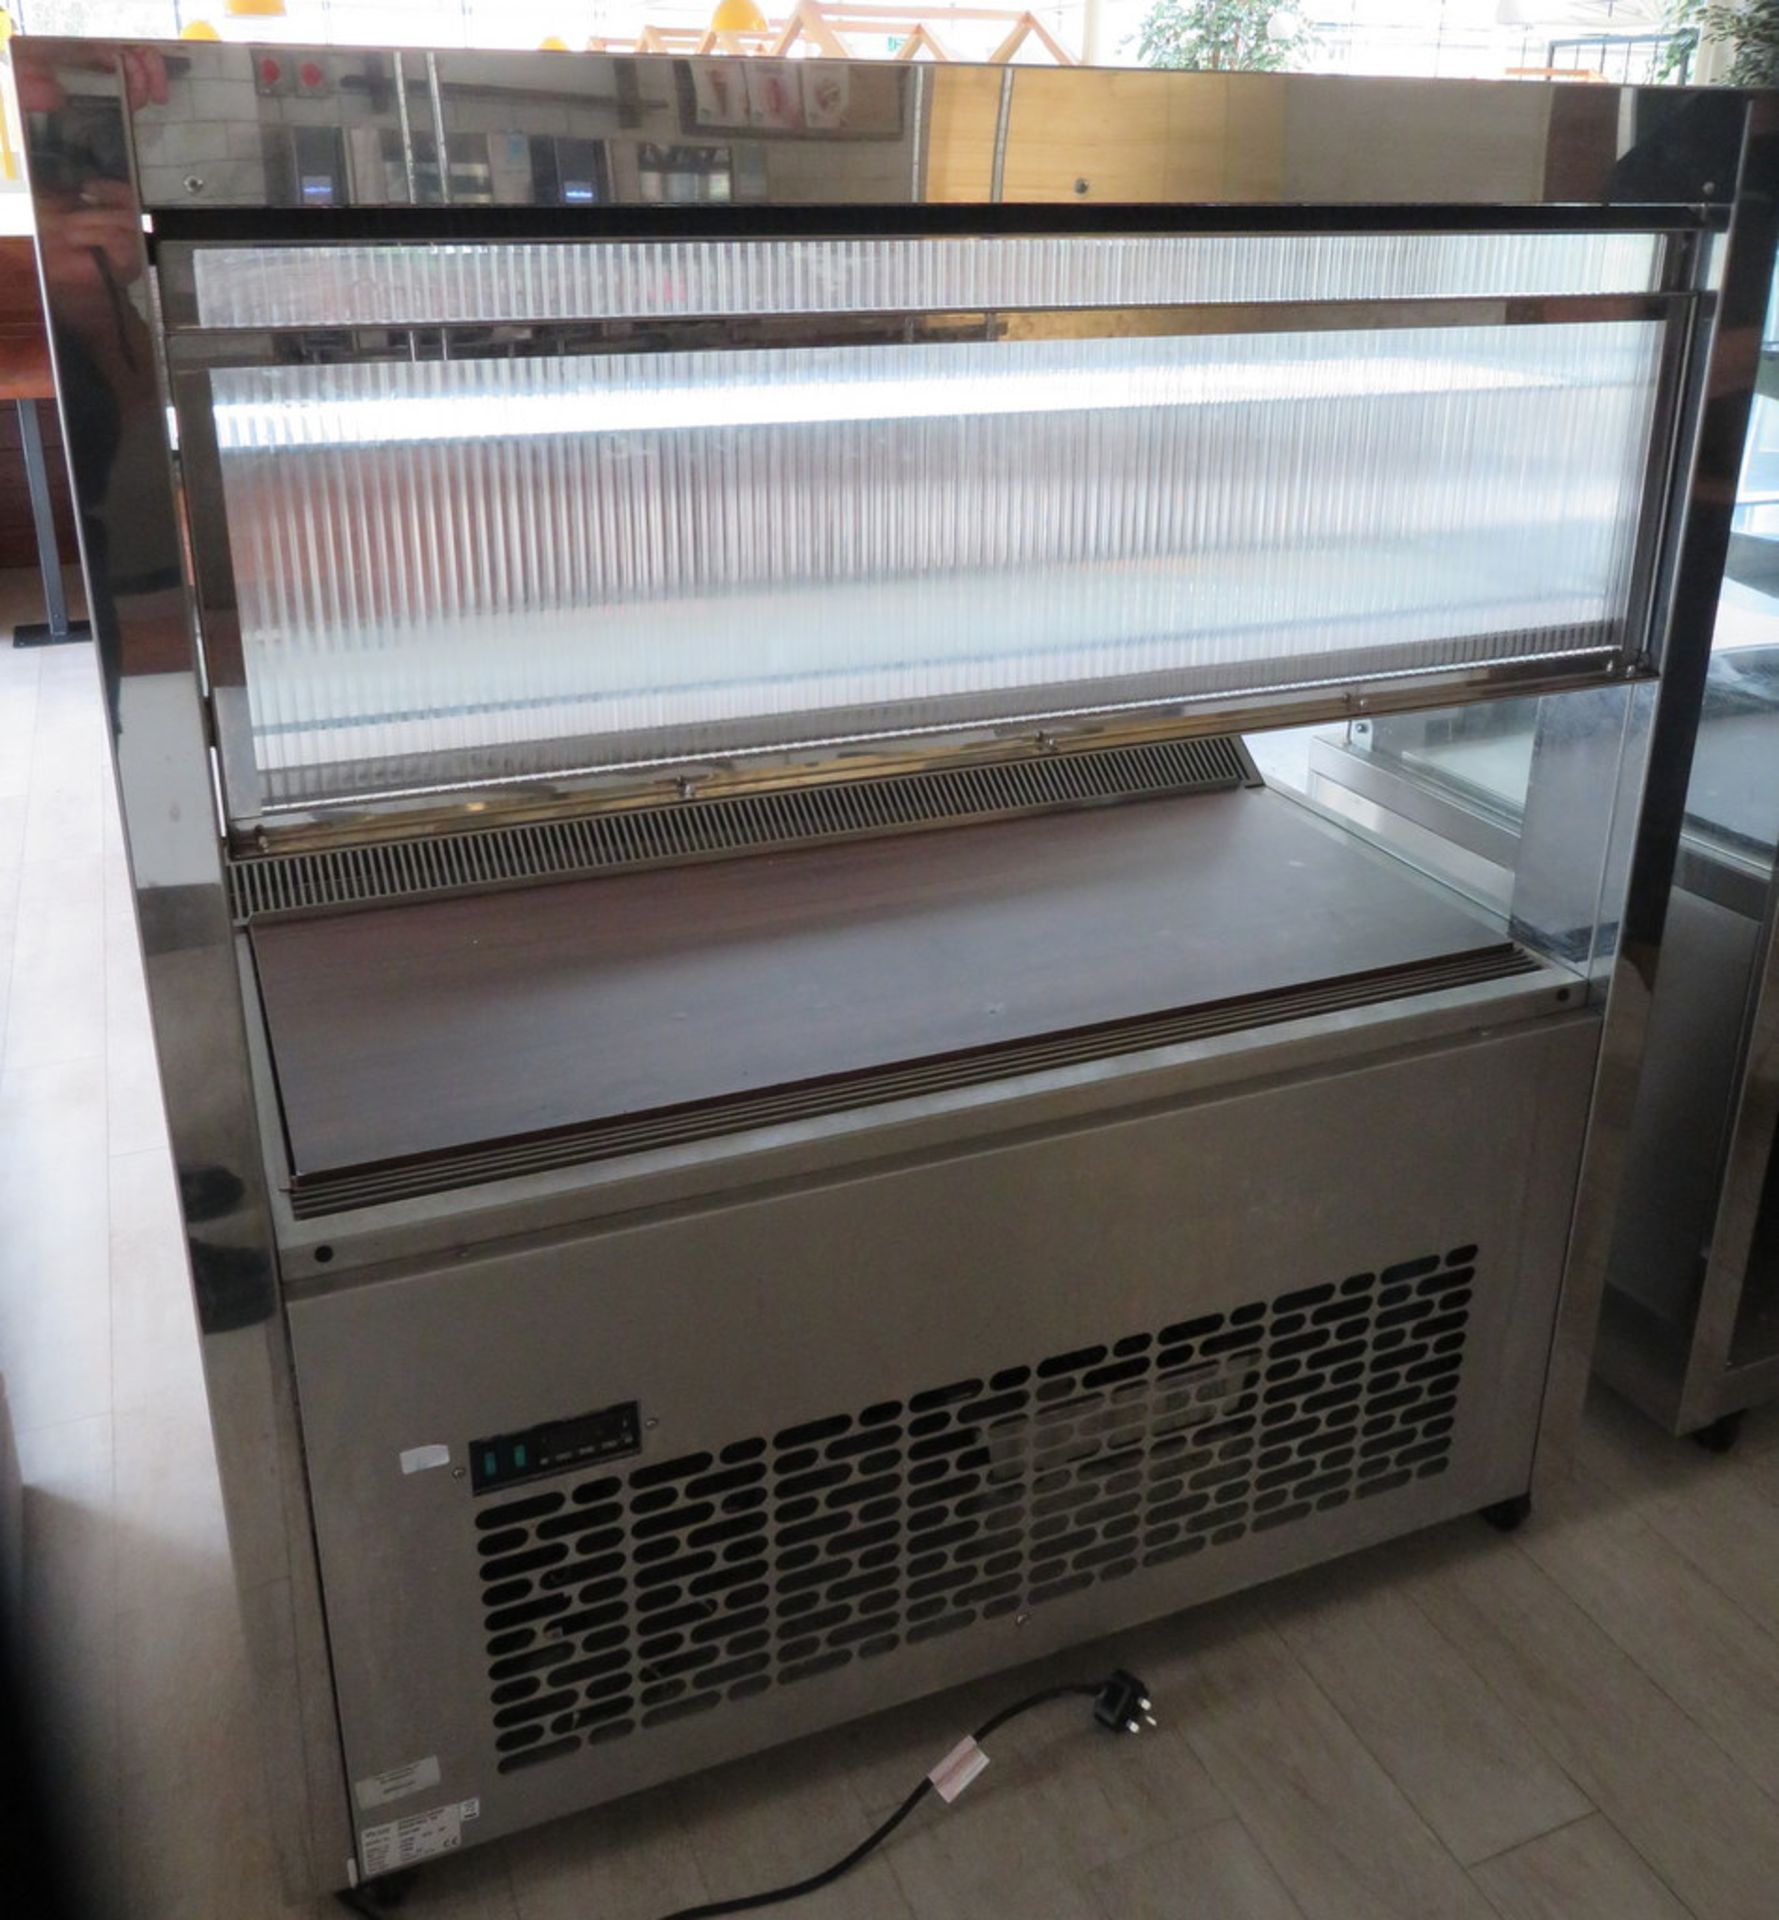 VICTOR MODEL RMR139E REFRIGERATED DISPLAY COUNTER - Image 3 of 4